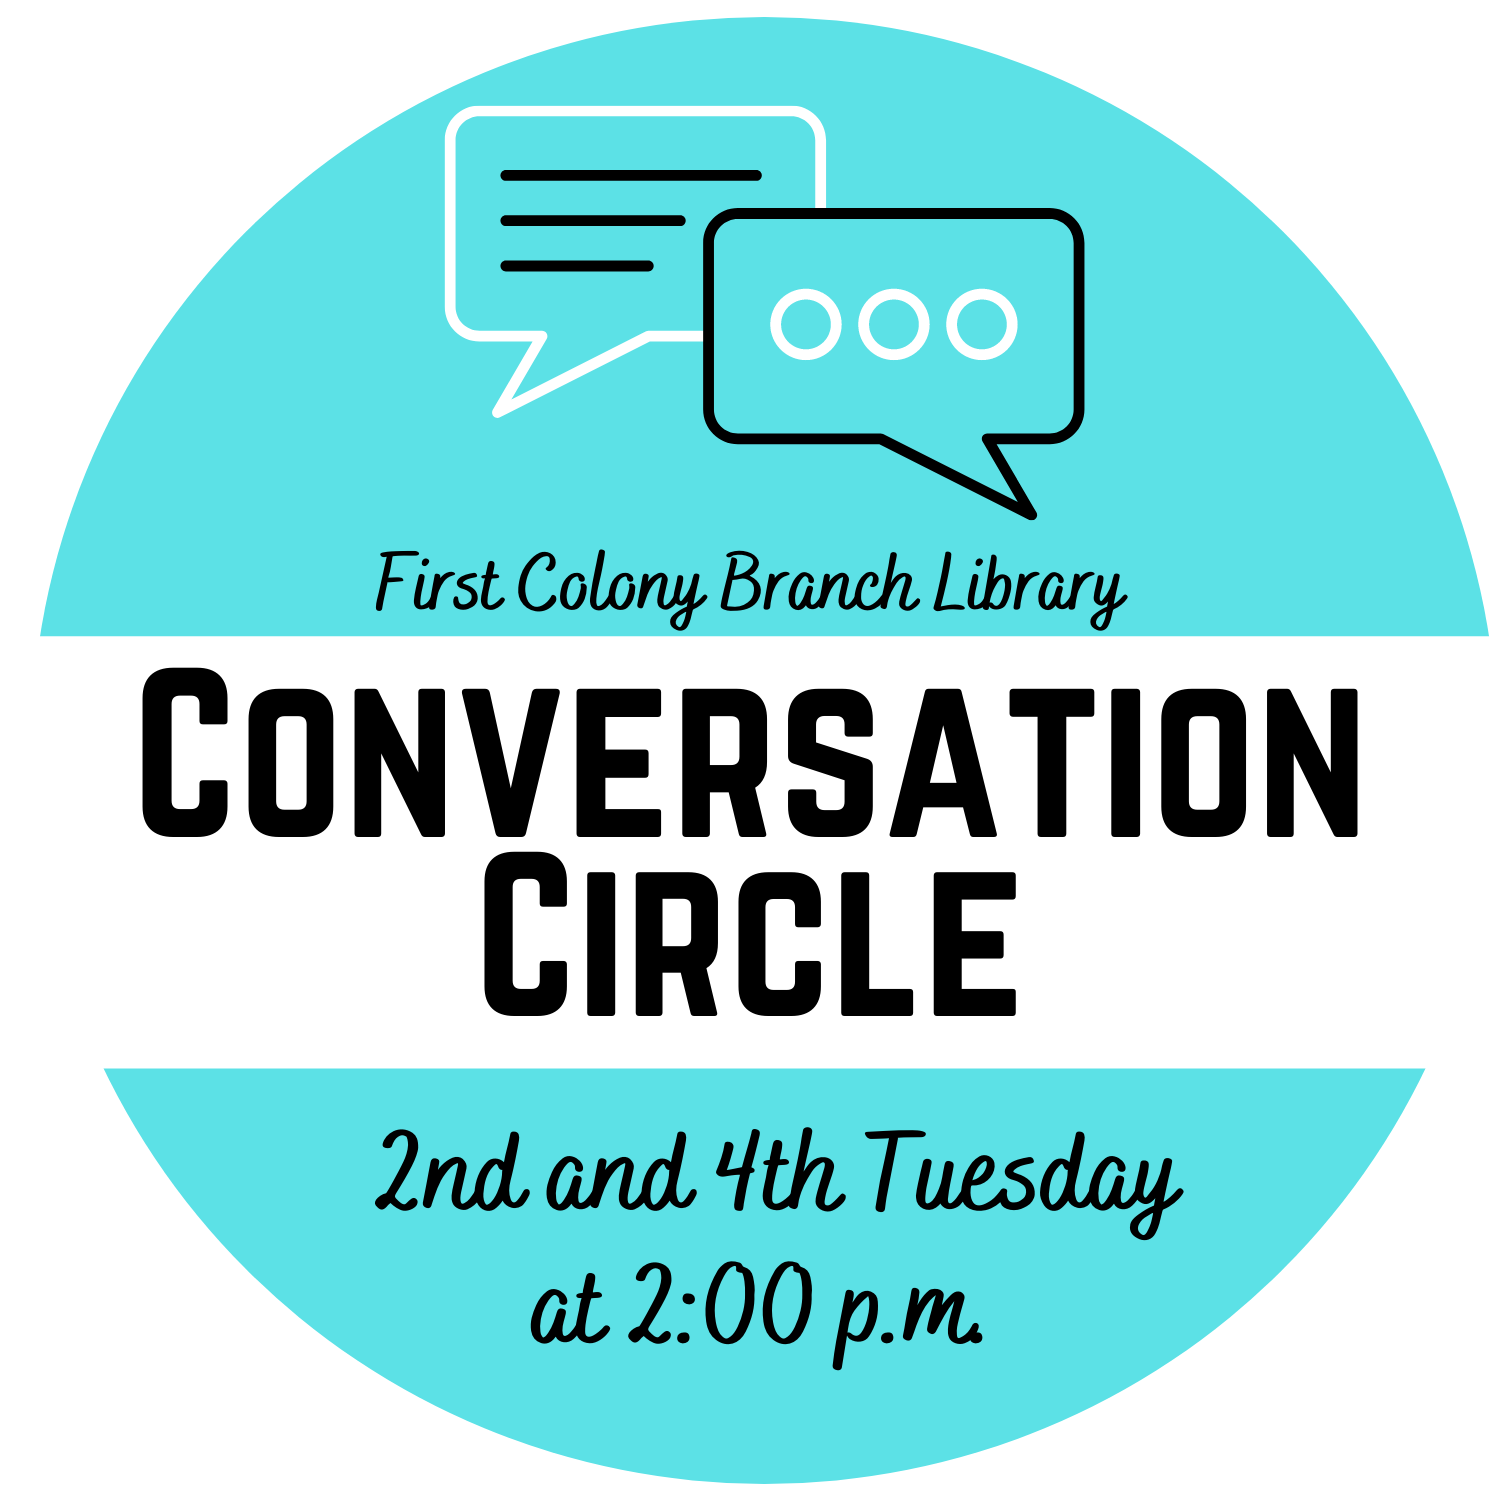 speech bubbles and text saying Conversation Circle 2nd and 4th Tuesday at 2pm